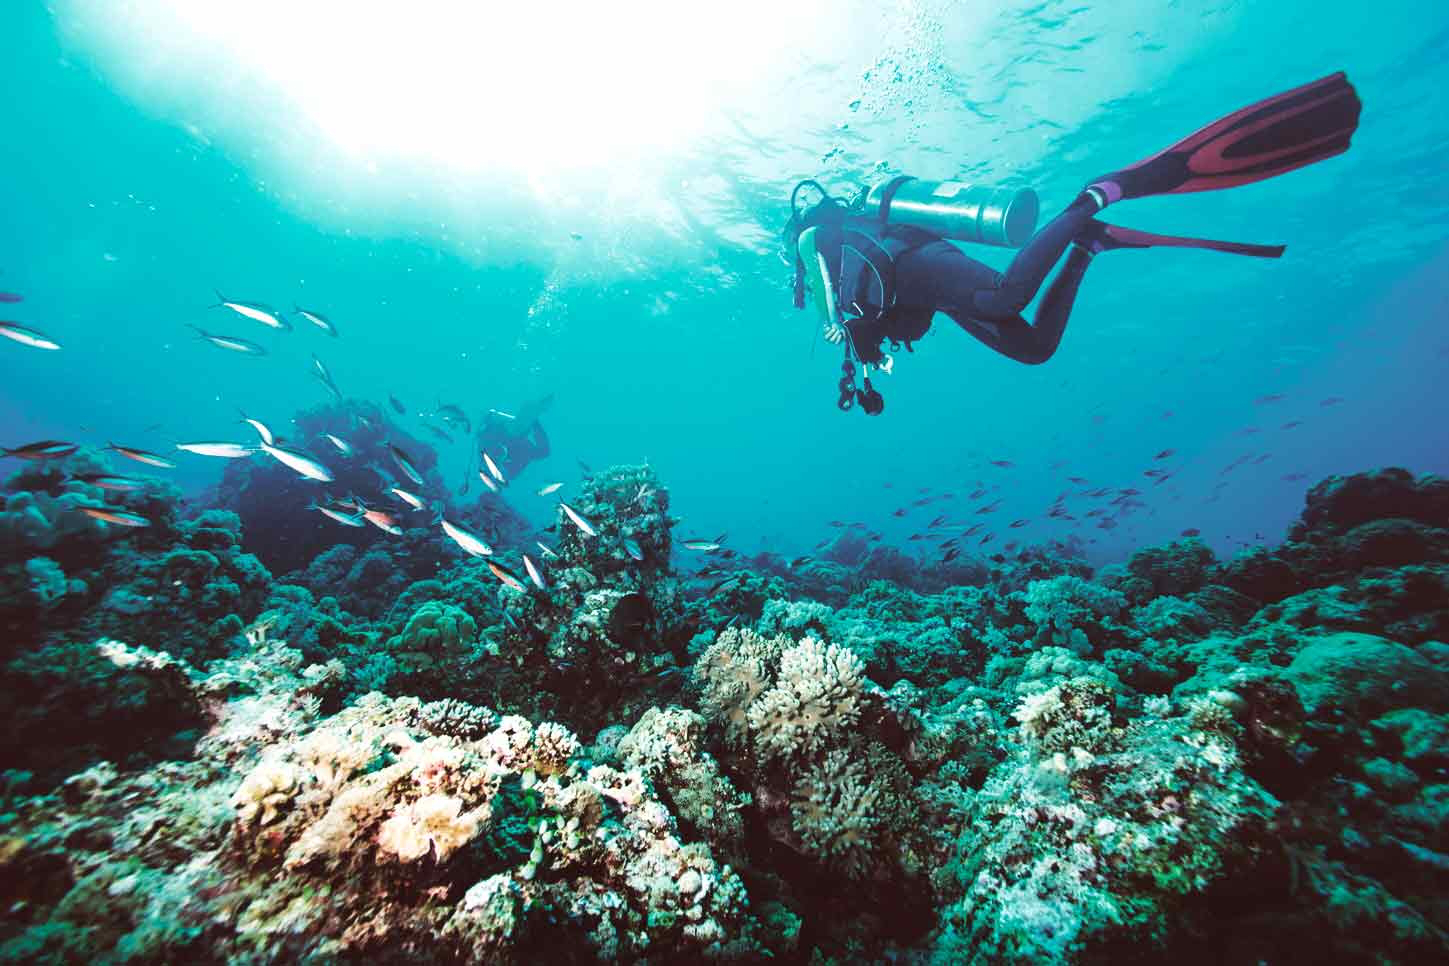 Scuba diving Gran Canaria means you can explore the underwater world